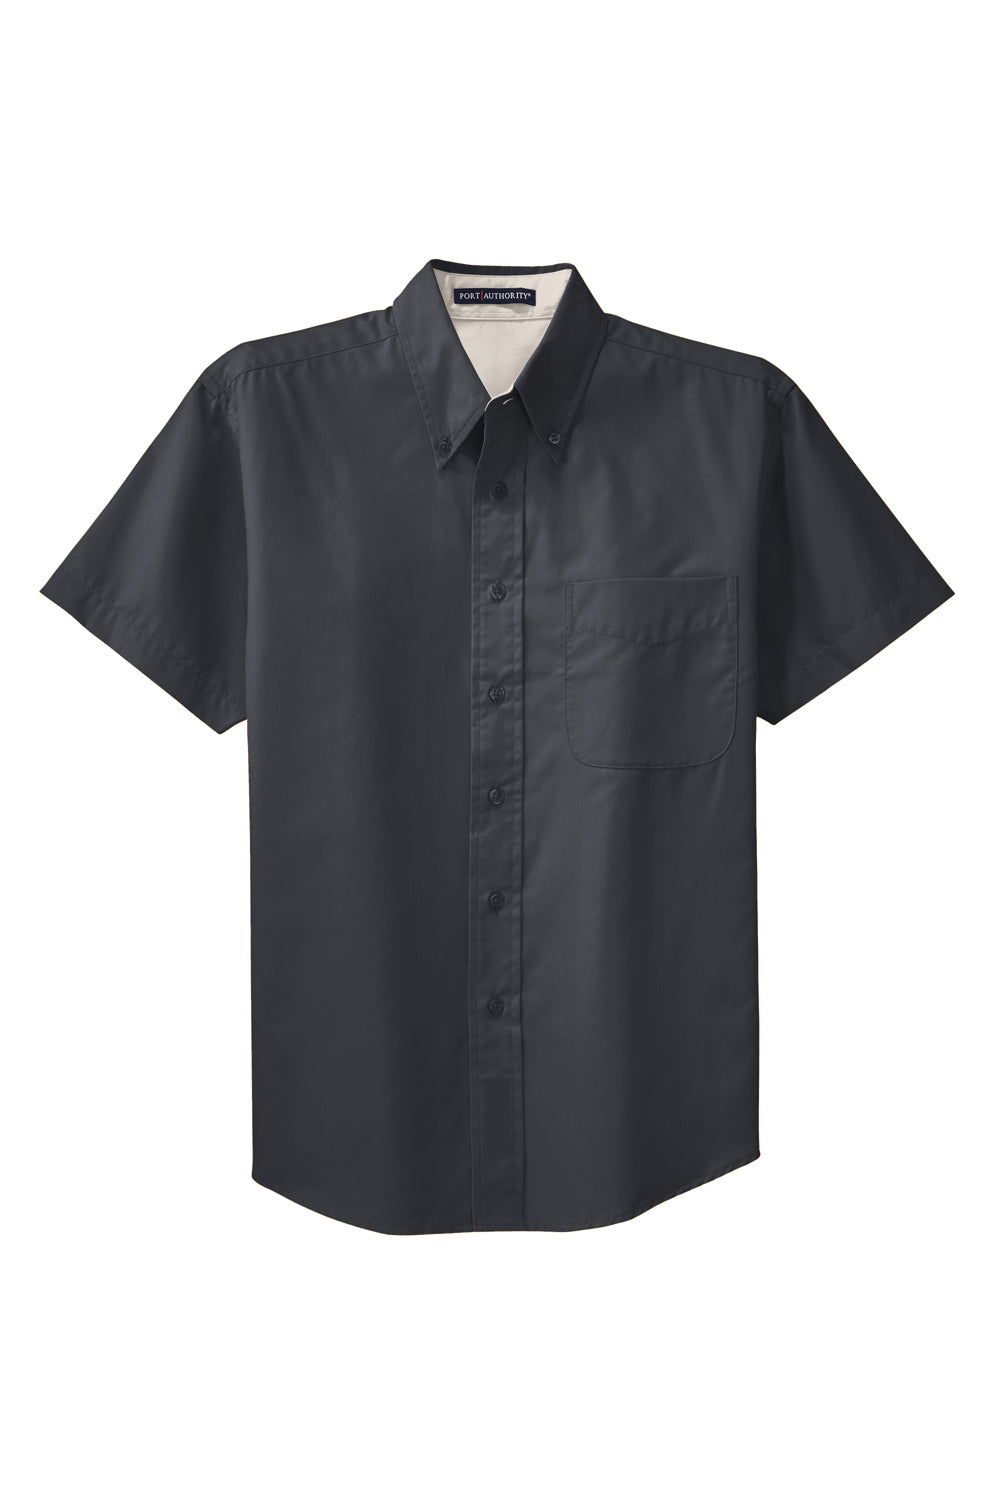 Port Authority S508/TLS508 Mens Easy Care Wrinkle Resistant Short Sleeve Button Down Shirt w/ Pocket Classic Navy Blue Flat Front